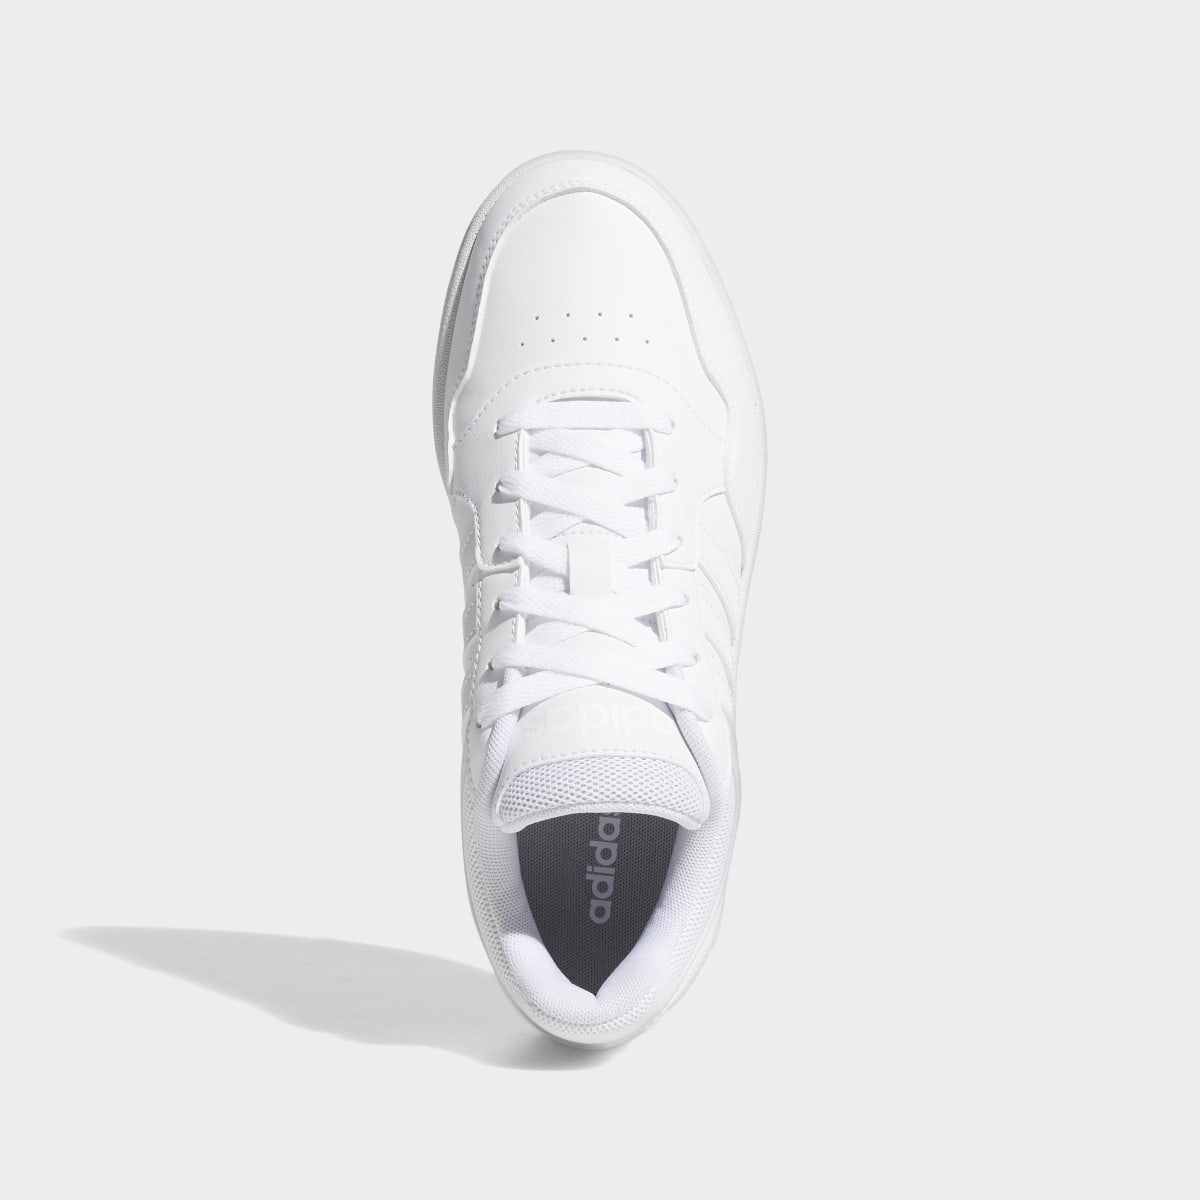 Adidas Hoops 3.0 Low Classic Schuh. 5